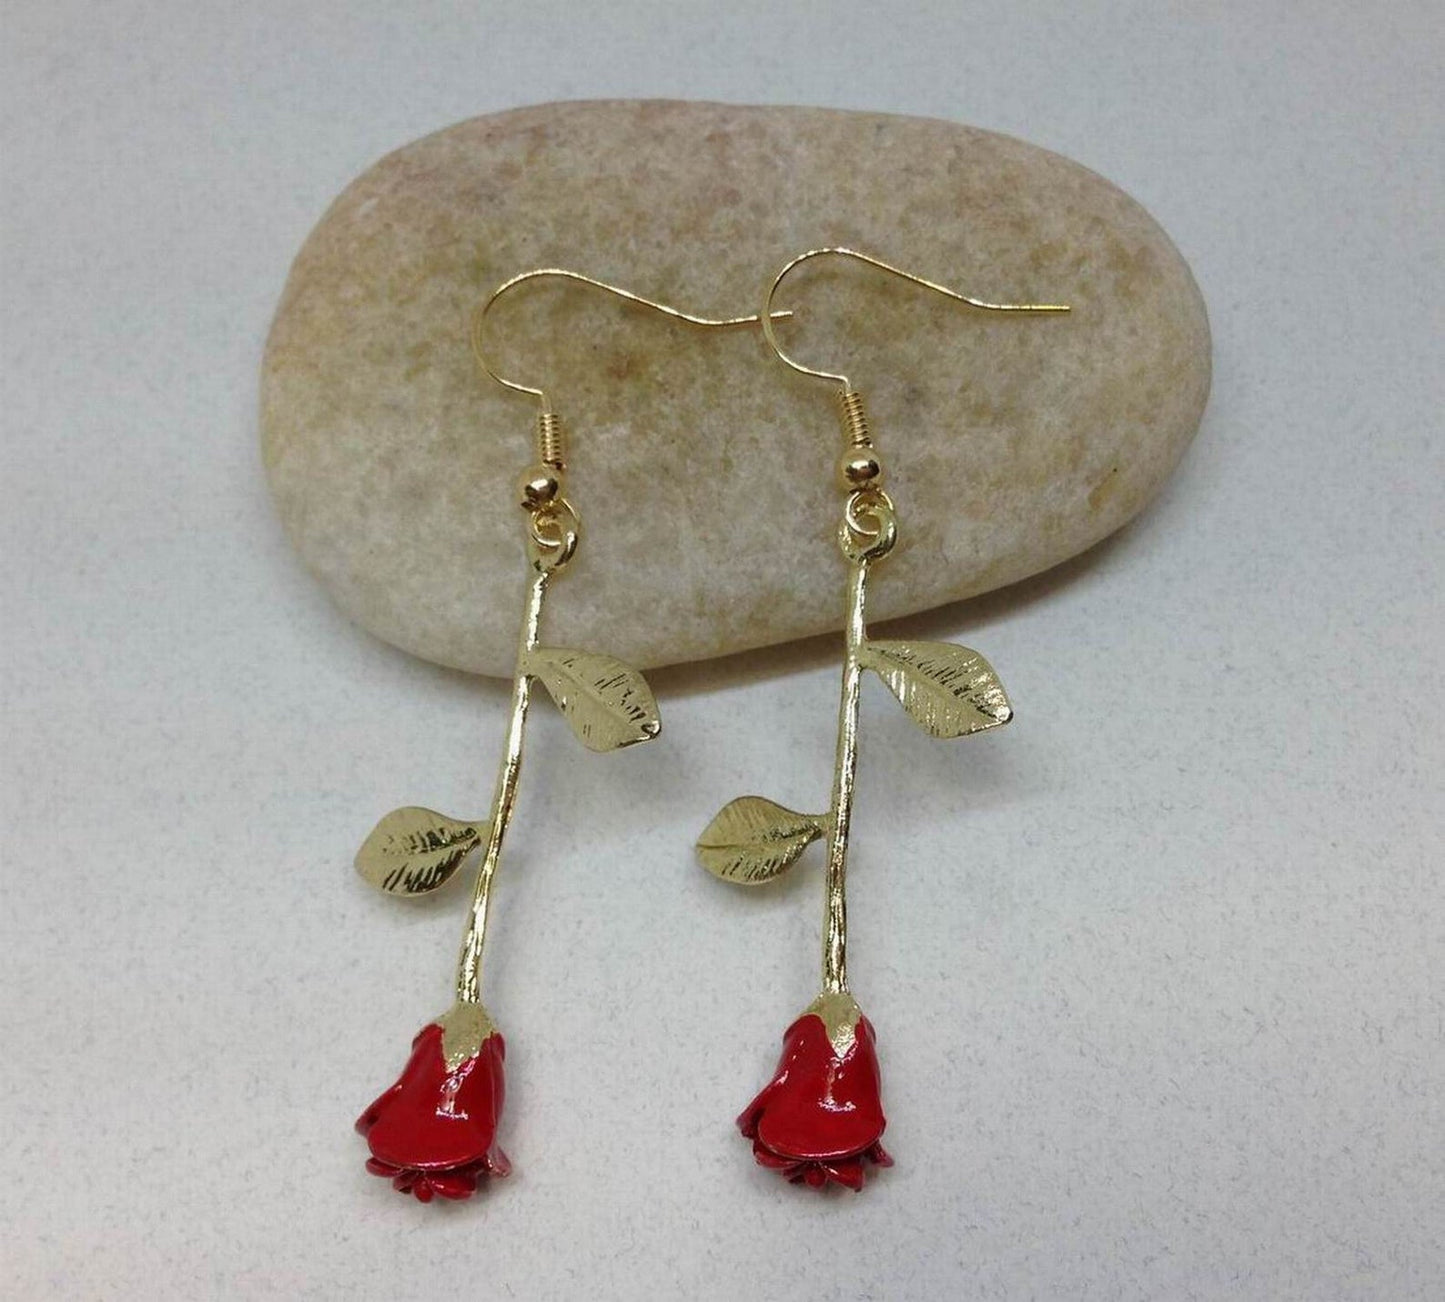 Rose Earrings, Beauty and The Beast Jewelry